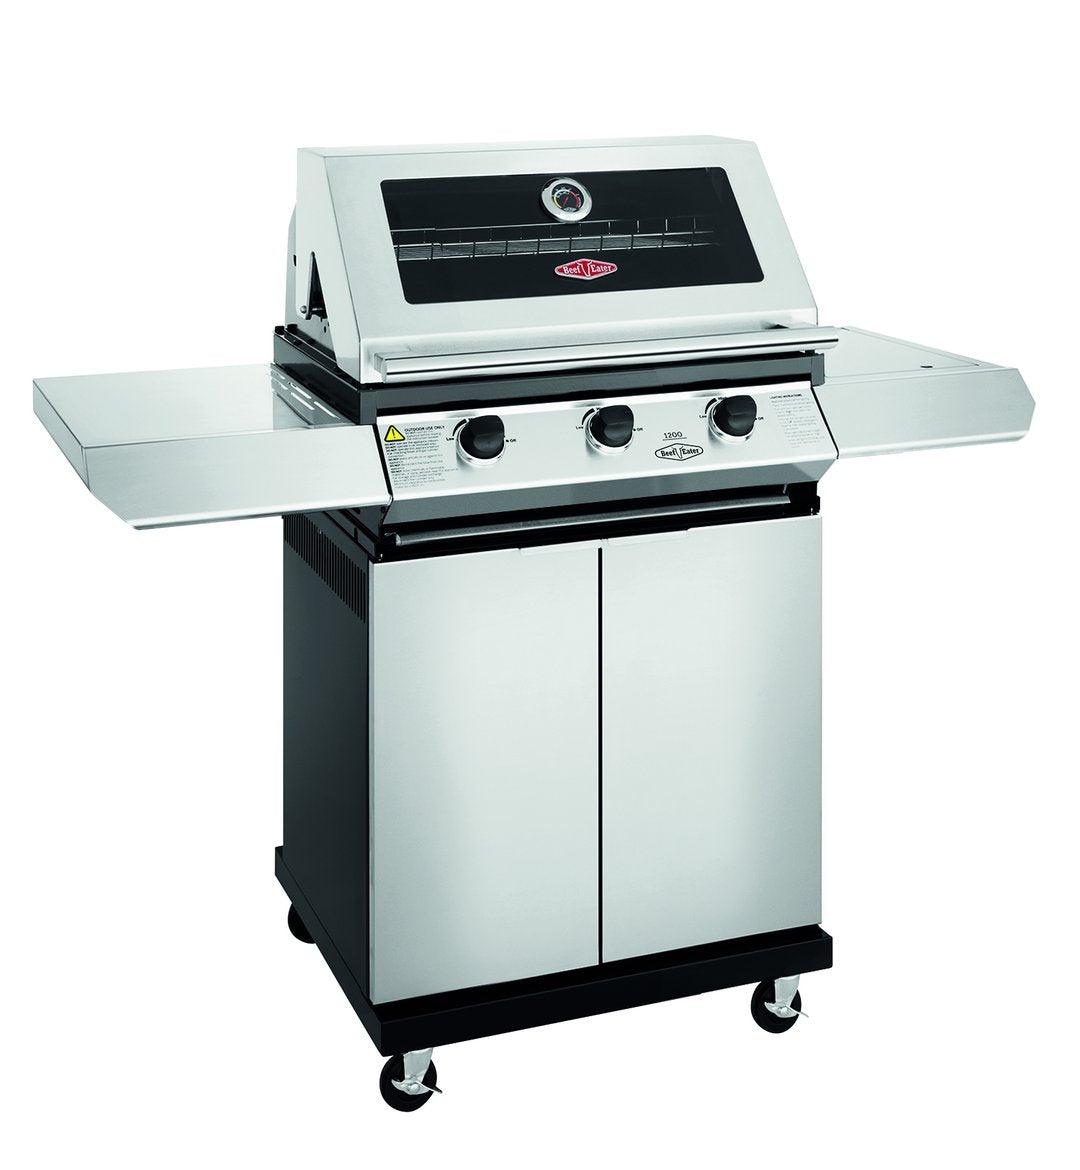 A stainless steel Brisks BeefEater 1200S Series 3 Burner BBQ & Trolley, featuring a built-in thermometer, two control knobs on the front panel, and two side shelves. Perfect for outdoor cooking, this grill is mounted on a wheeled cart with a storage compartment below.